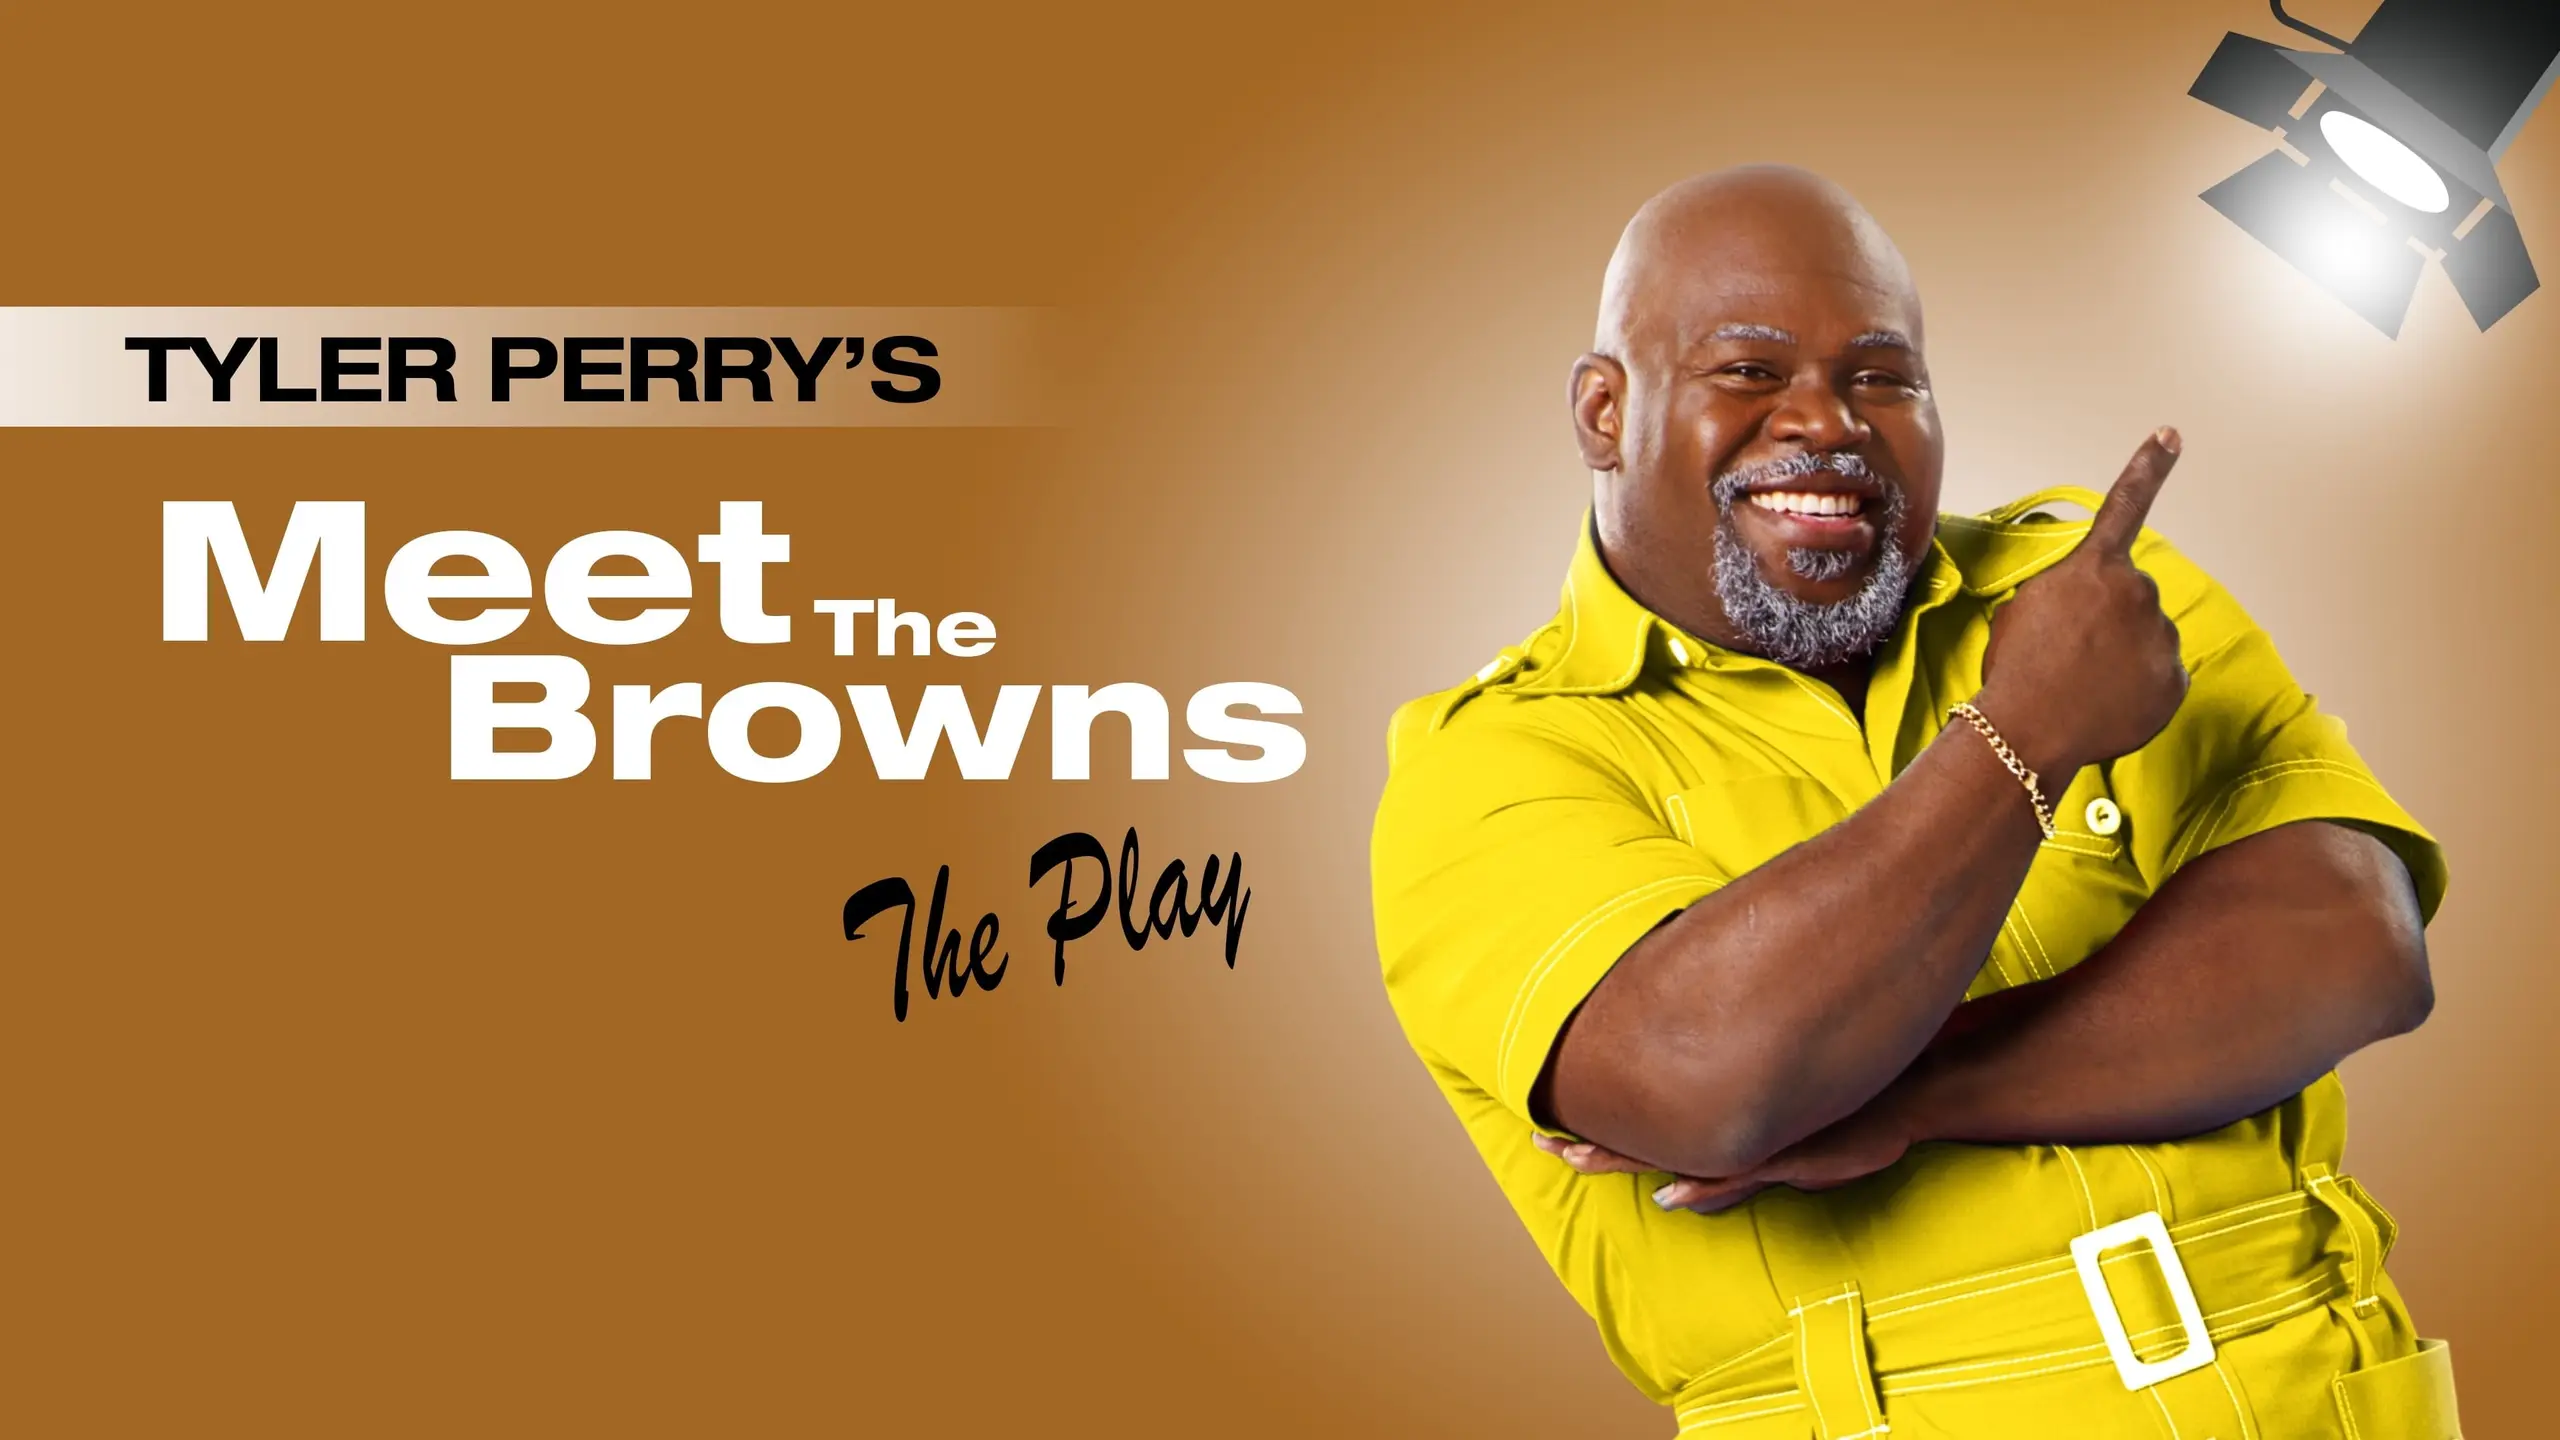 Tyler Perry's Meet The Browns - The Play